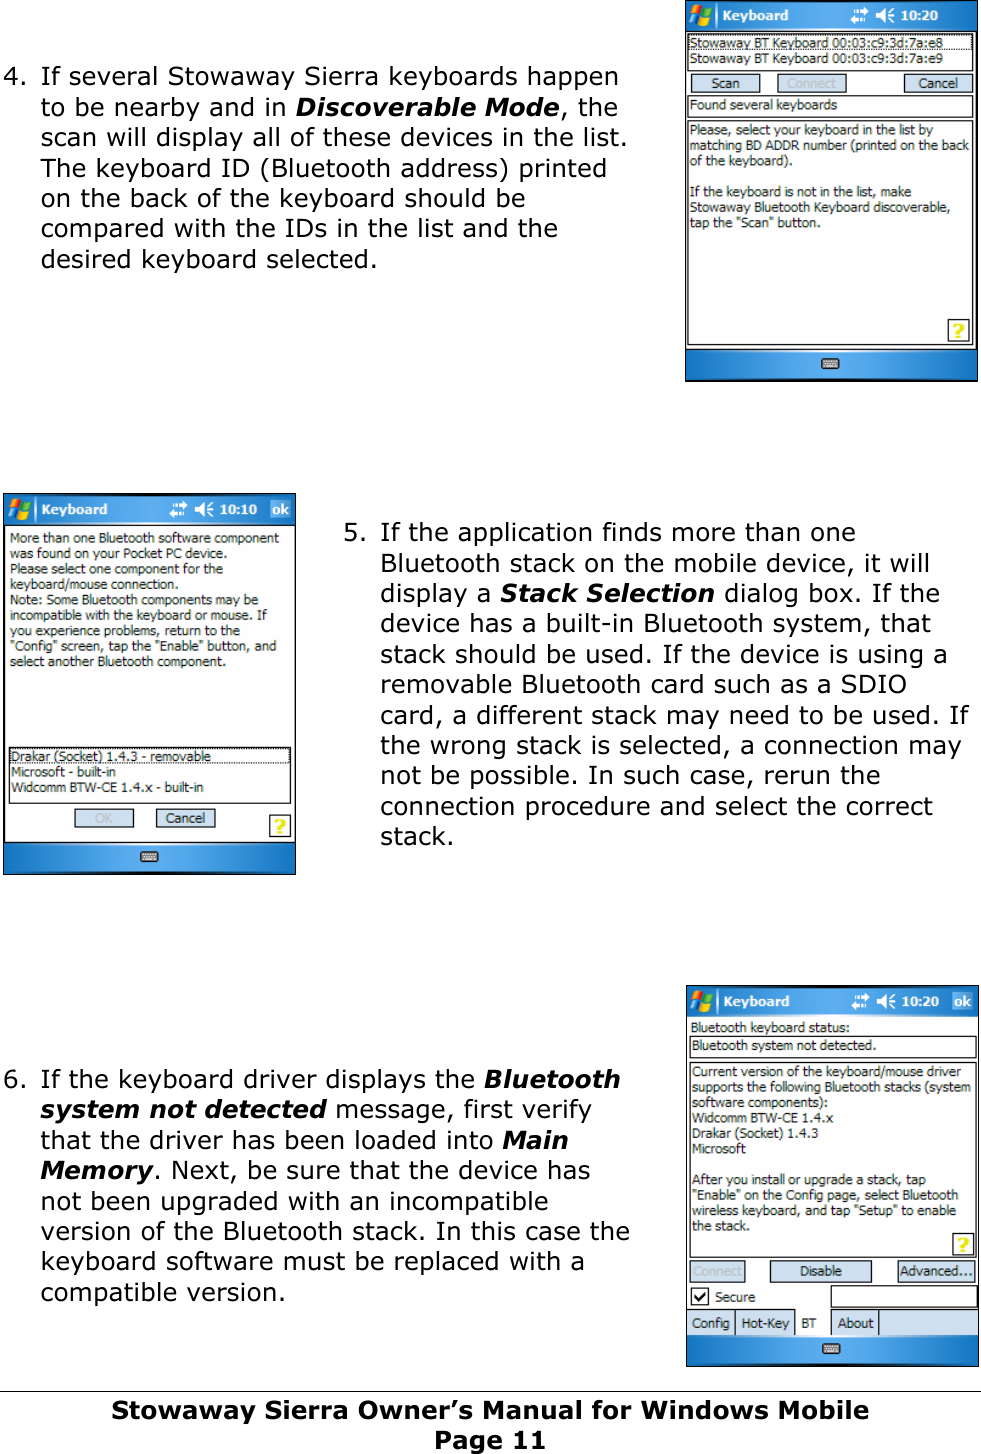   4. If several Stowaway Sierra keyboards happen to be nearby and in Discoverable Mode, the scan will display all of these devices in the list. The keyboard ID (Bluetooth address) printed on the back of the keyboard should be compared with the IDs in the list and the desired keyboard selected.         5. If the application finds more than one Bluetooth stack on the mobile device, it will display a Stack Selection dialog box. If the device has a built-in Bluetooth system, that stack should be used. If the device is using a removable Bluetooth card such as a SDIO card, a different stack may need to be used. If the wrong stack is selected, a connection may not be possible. In such case, rerun the connection procedure and select the correct stack.        6. If the keyboard driver displays the Bluetooth system not detected message, first verify that the driver has been loaded into Main Memory. Next, be sure that the device has not been upgraded with an incompatible version of the Bluetooth stack. In this case the keyboard software must be replaced with a compatible version.   Stowaway Sierra Owner’s Manual for Windows Mobile Page 11 